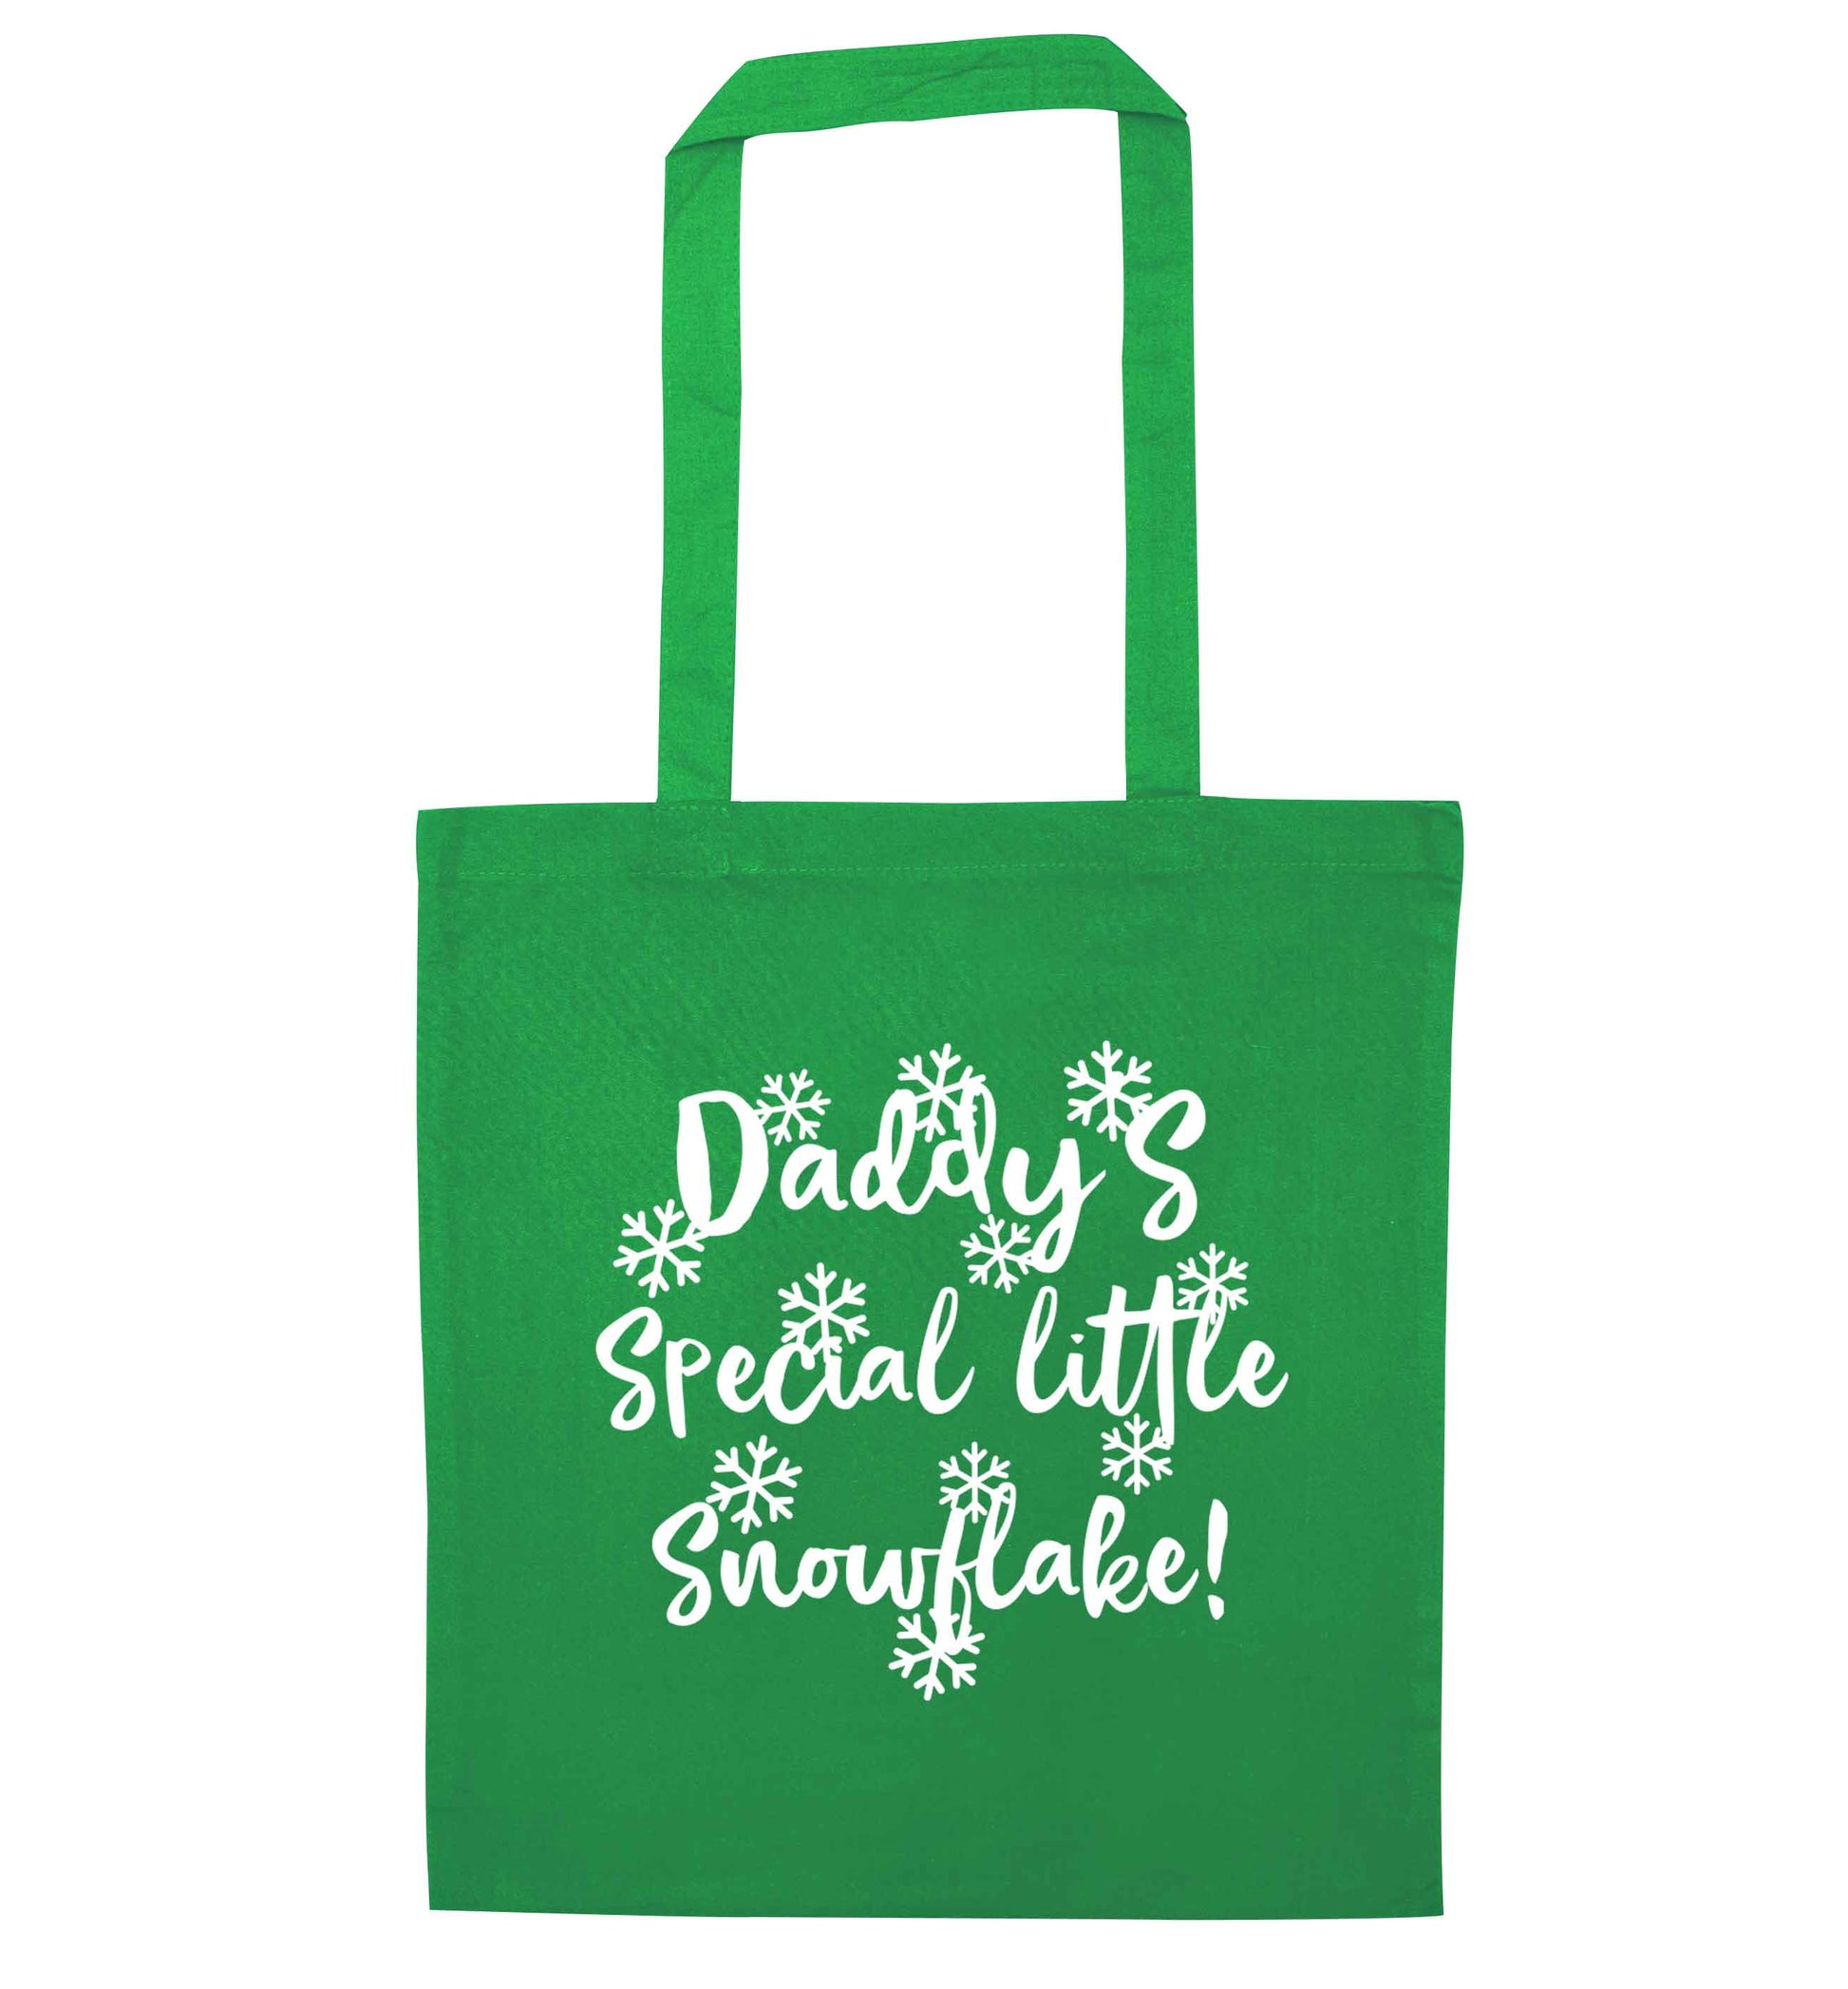 Daddy's special little snowflake green tote bag